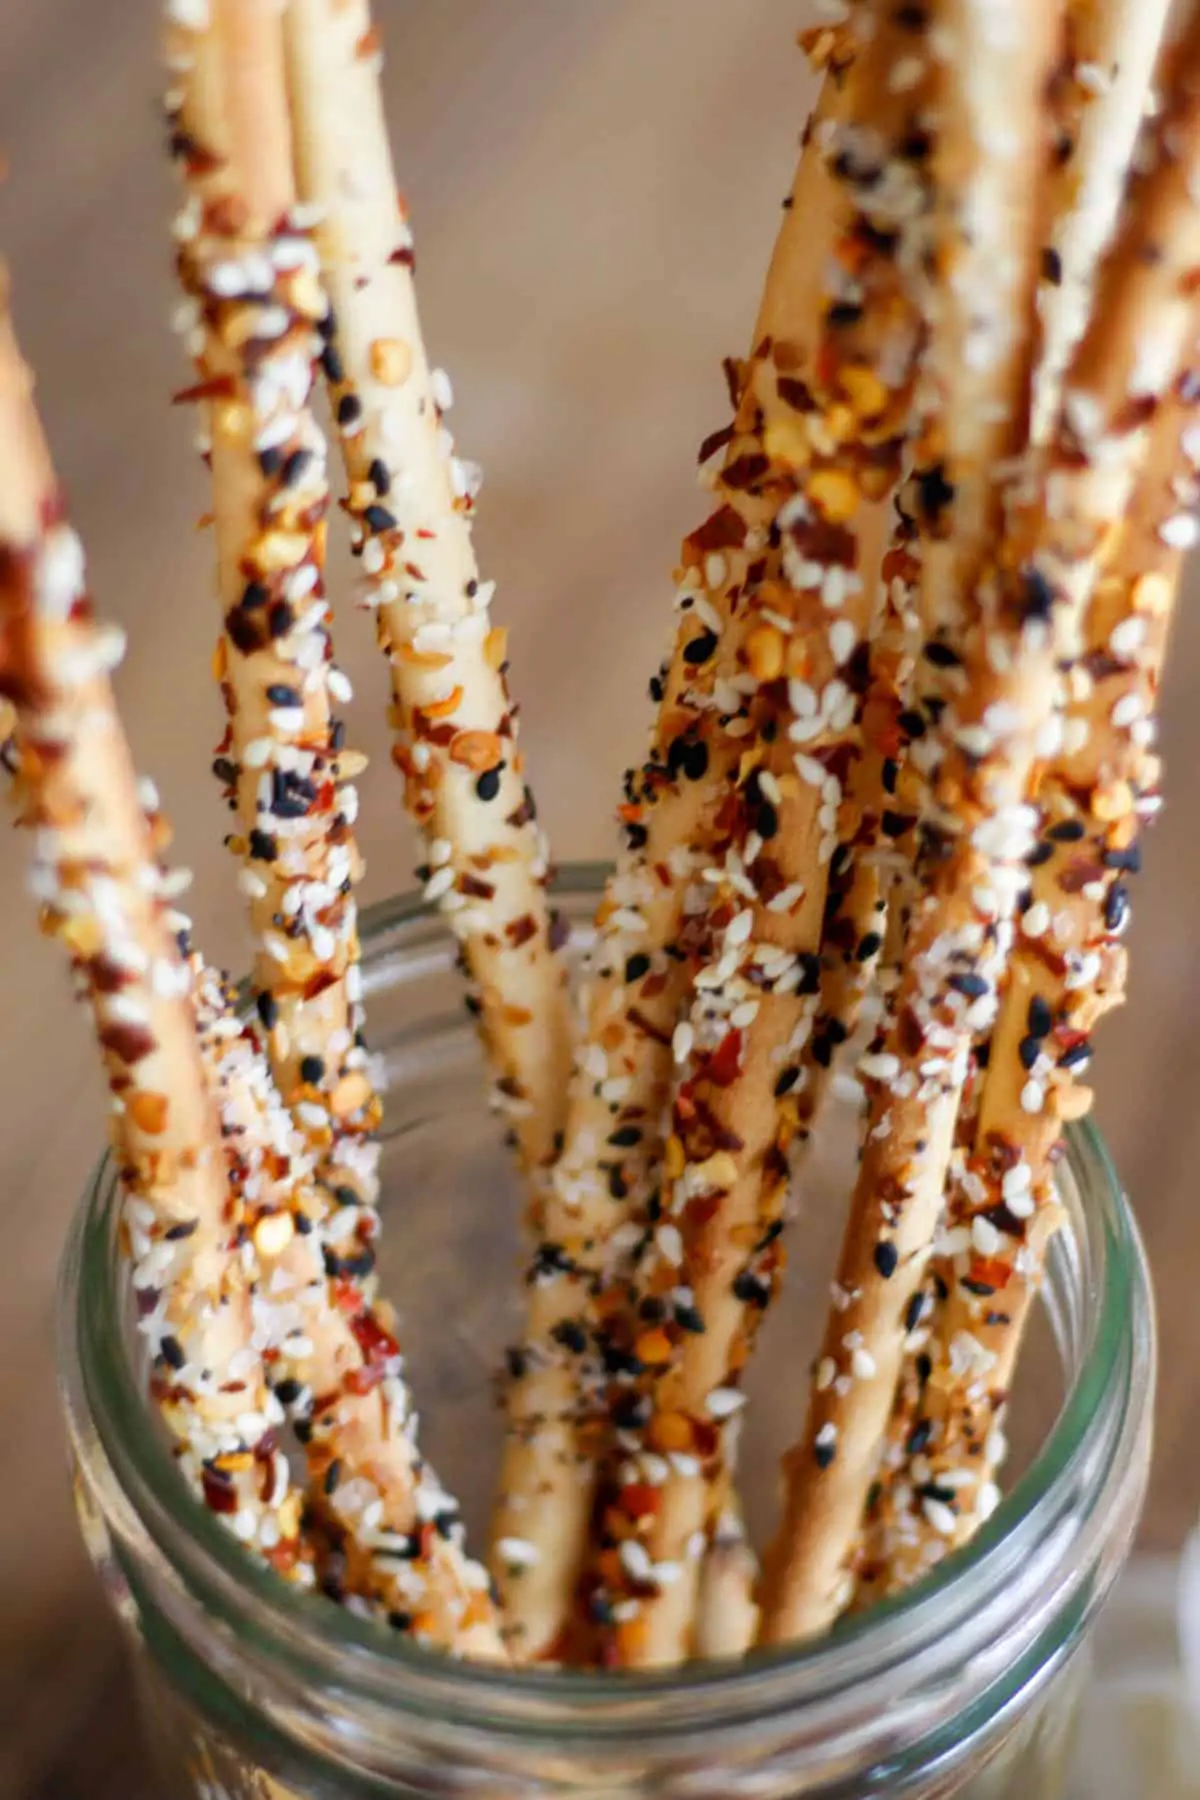 Thin breadsticks coated with everything bagel seasoning, salt and red chili flakes standing in a glass jar.